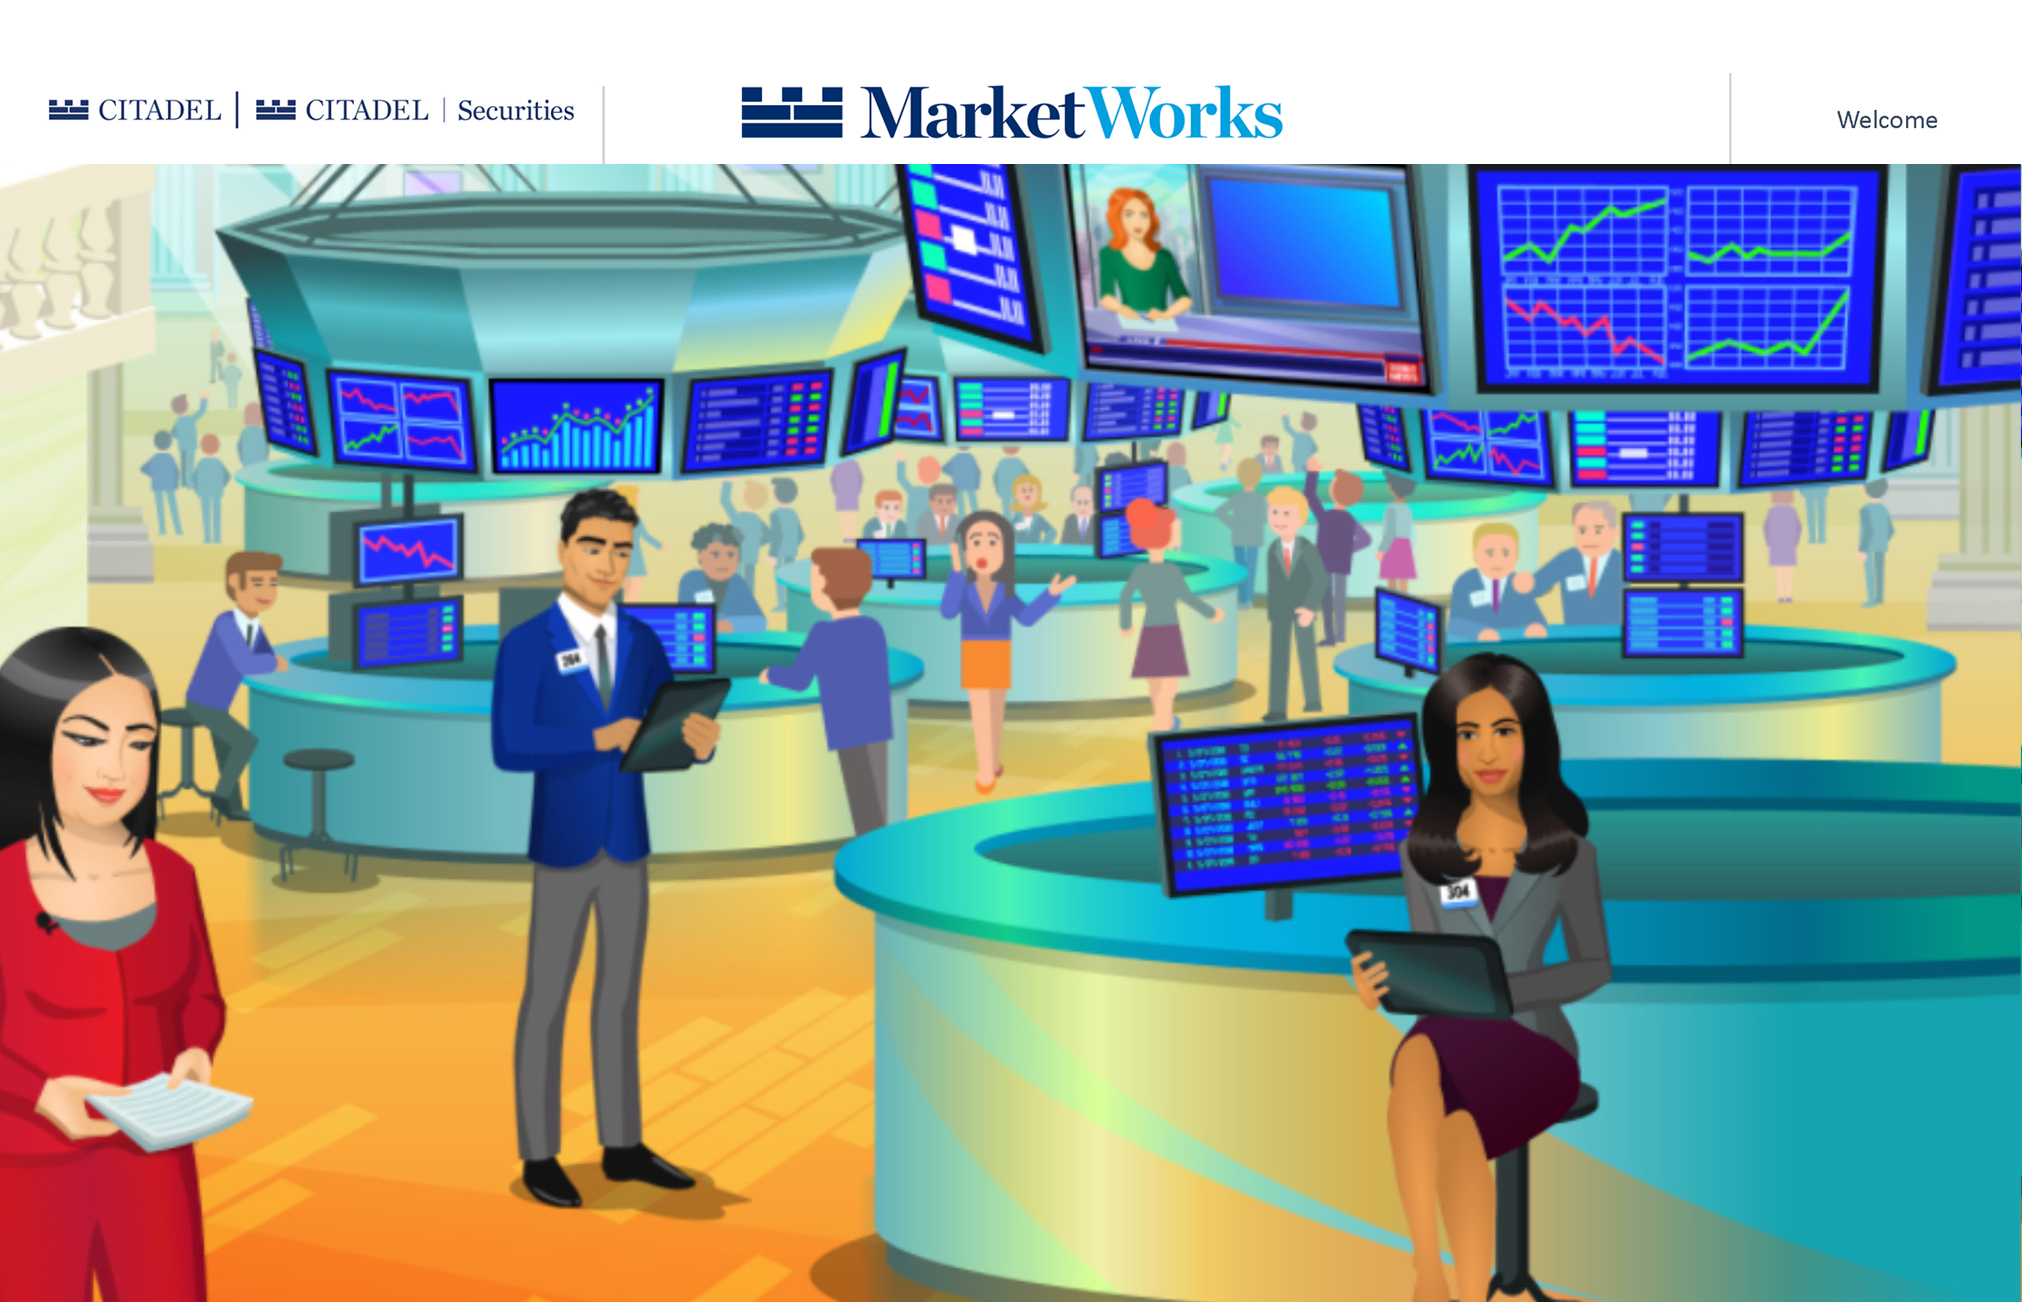 Citadel and Citadel Securities Announce Nationwide Expansion of MarketWorks Financial Education Program